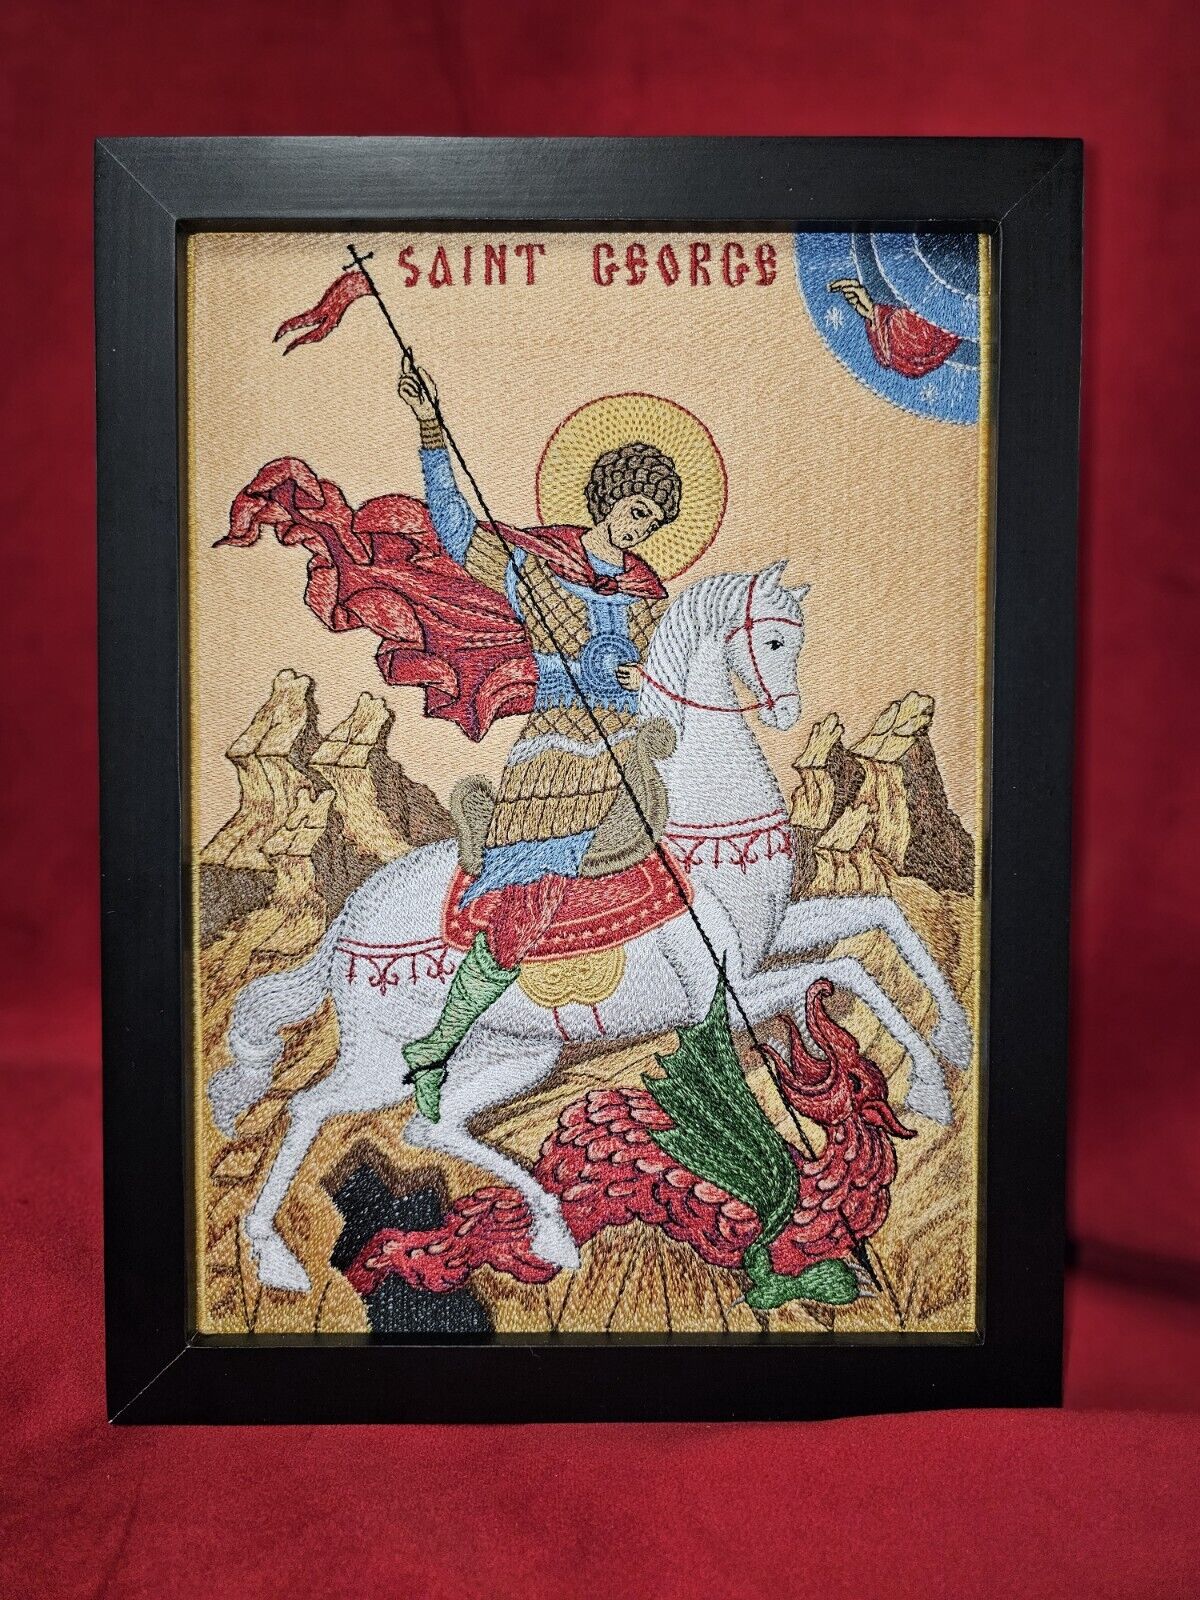 8x11 St. George  Embroidred Orthodox Icon 